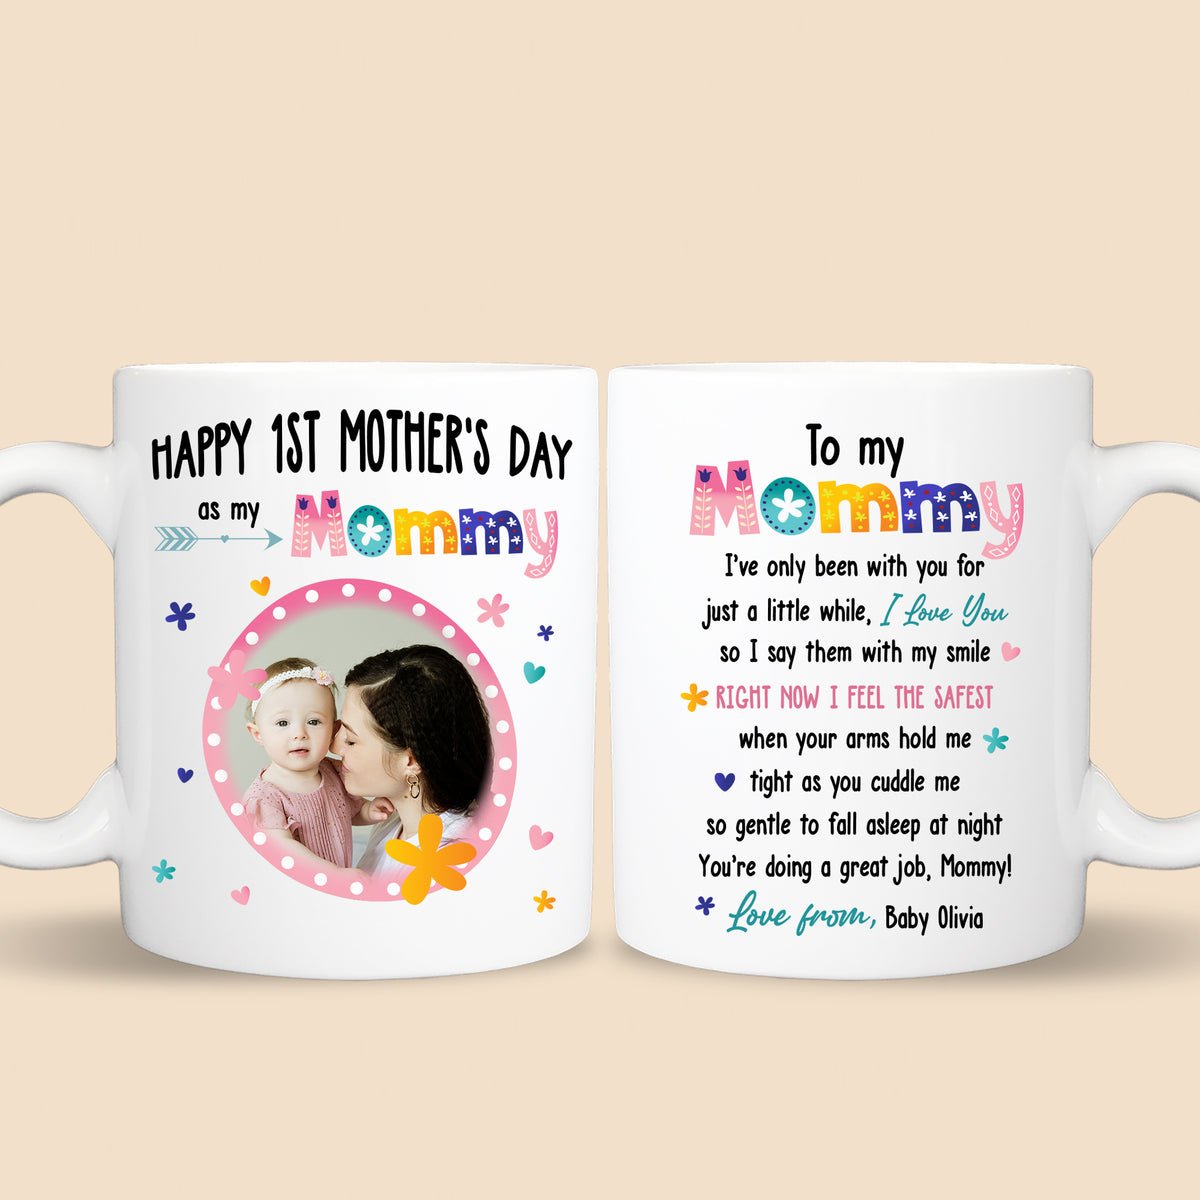 Happy 1st Mother's Day Cute Baby Photo - Personalized White Mug - Best Gift For Mom - Giftago